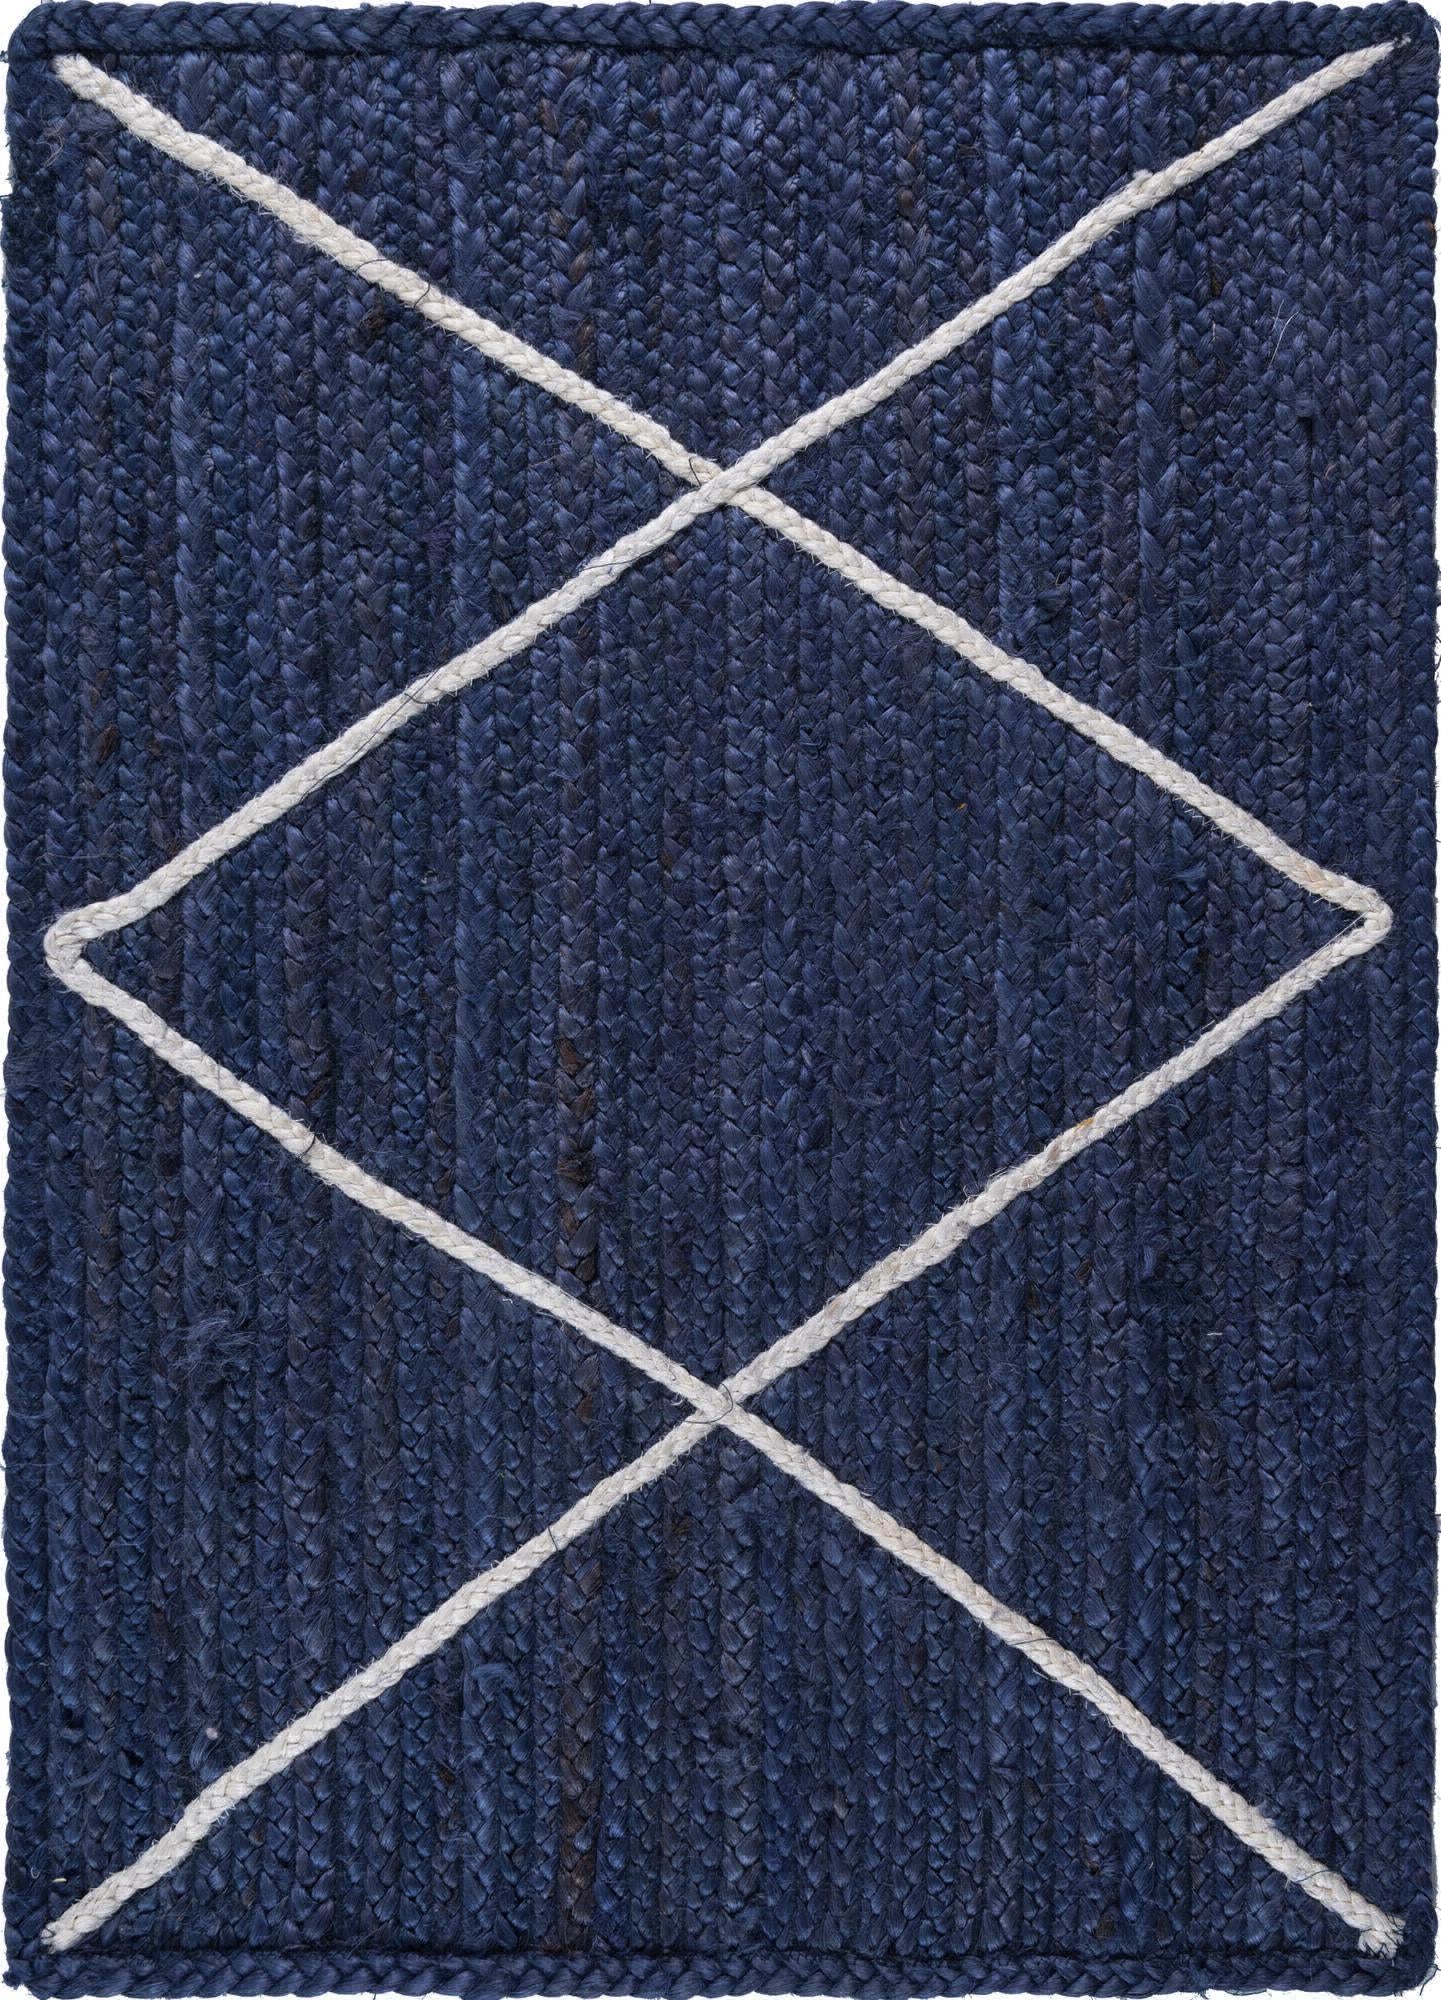 Unique Loom Braided Jute MGN-28 Navy Blue Area Rug main image